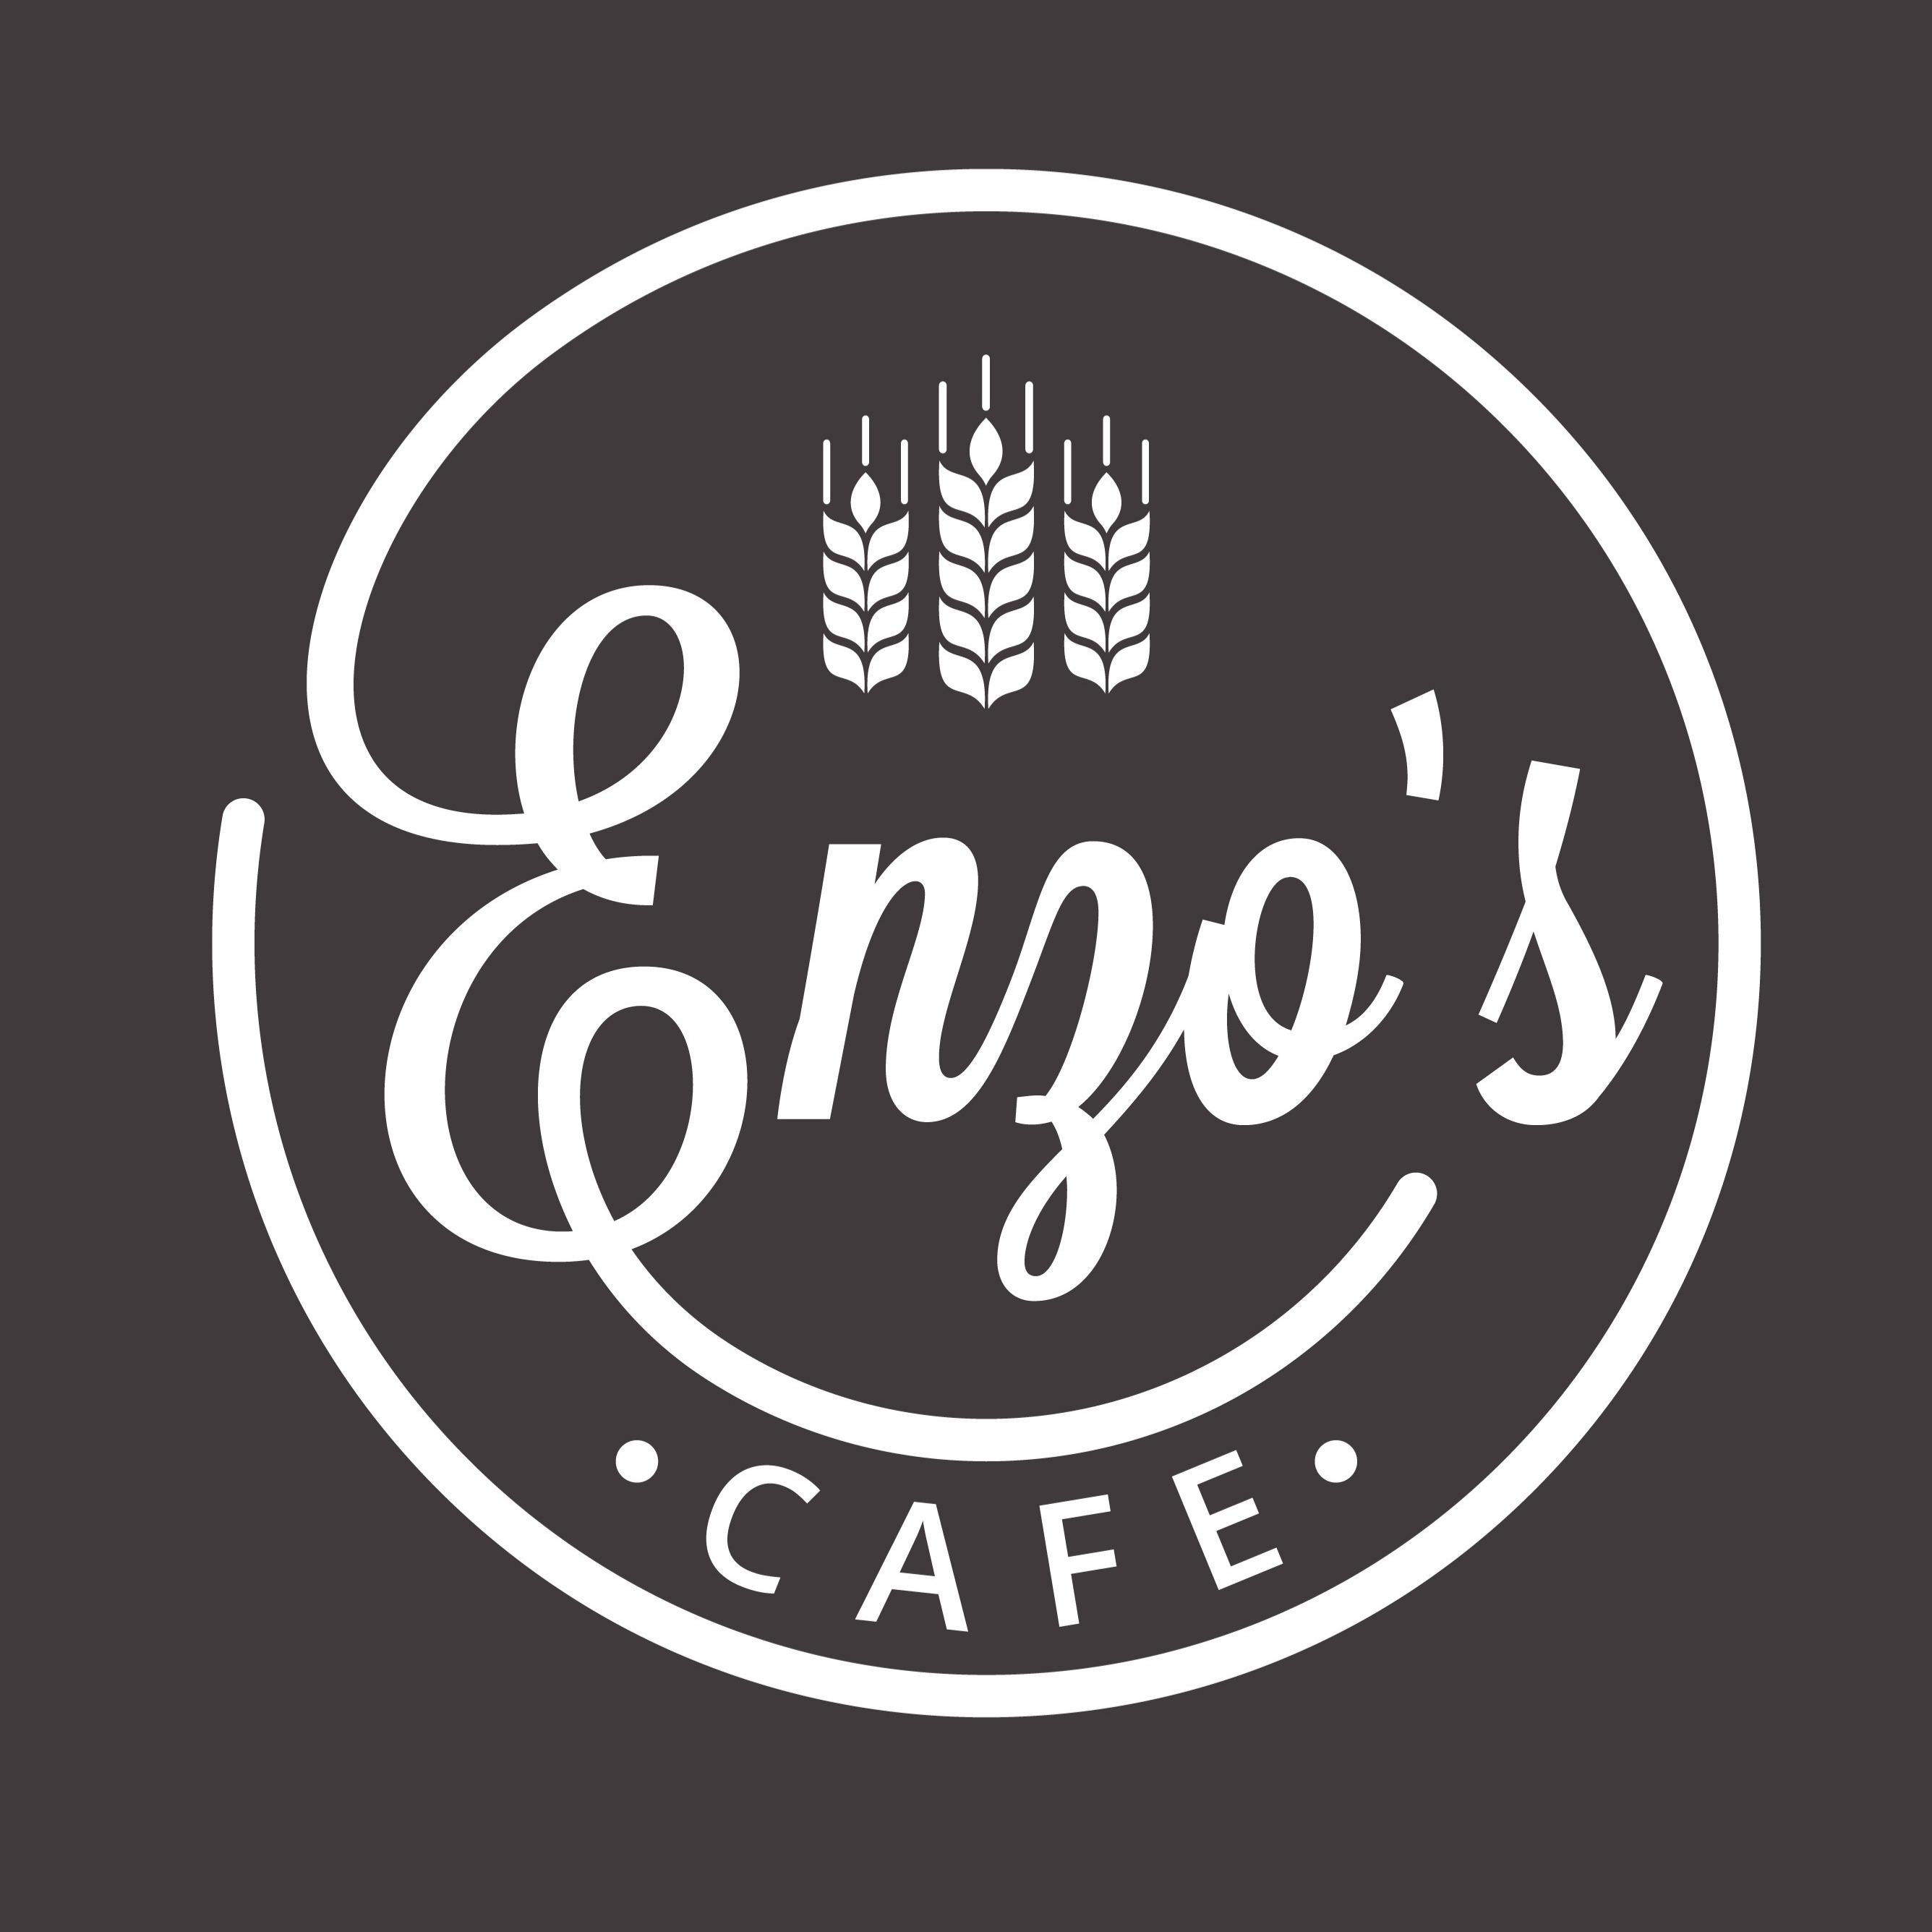 Enzo's Cafe And Bakery